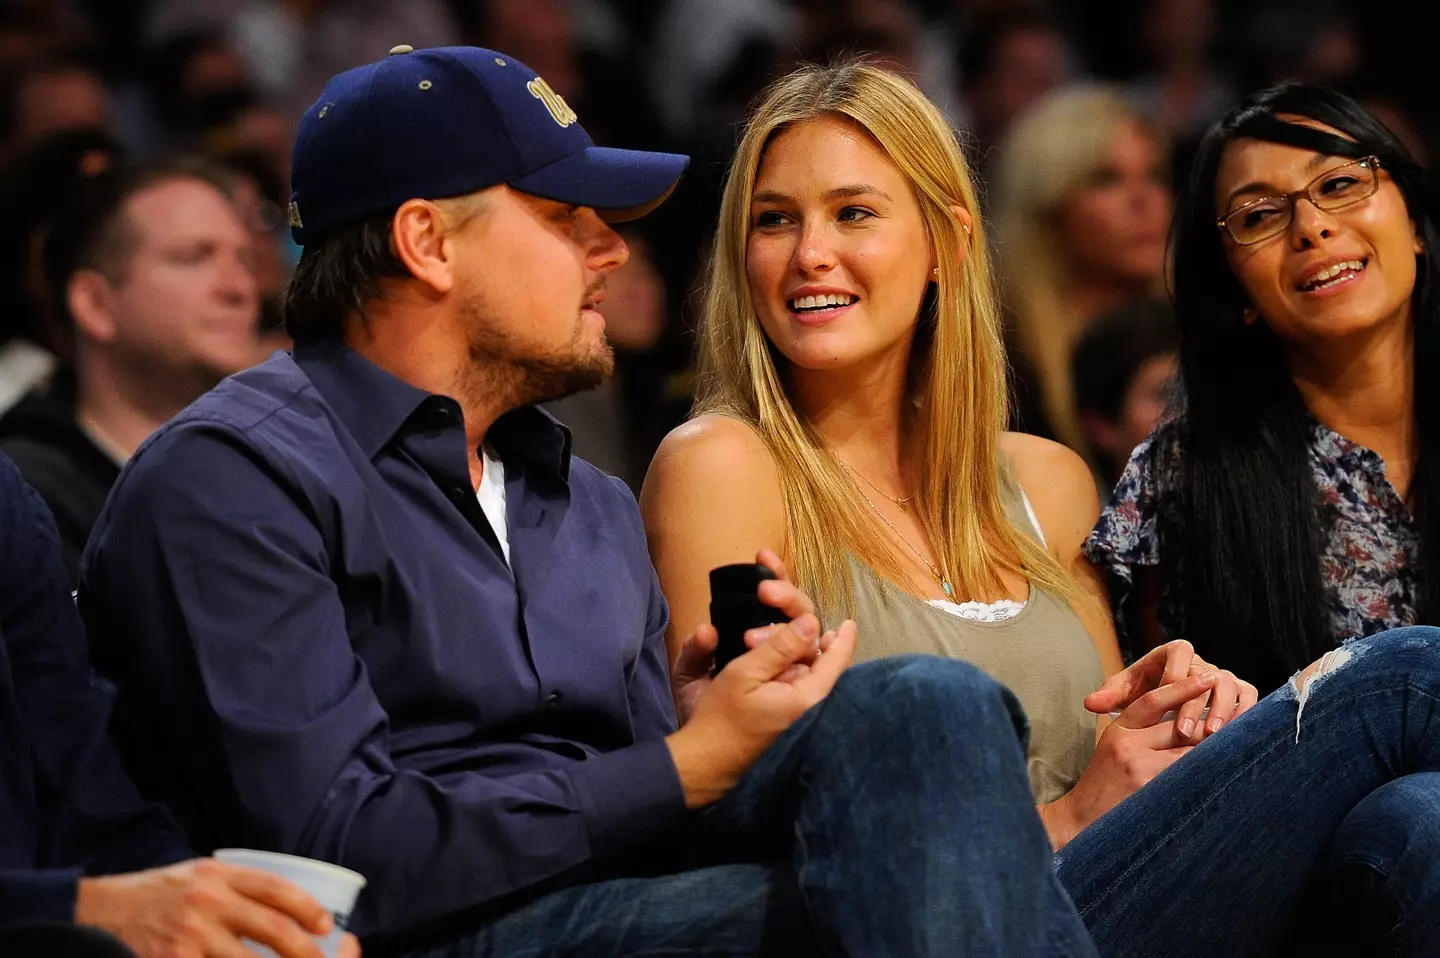 Leo previously dated 20-year-old Bar Refaeli.